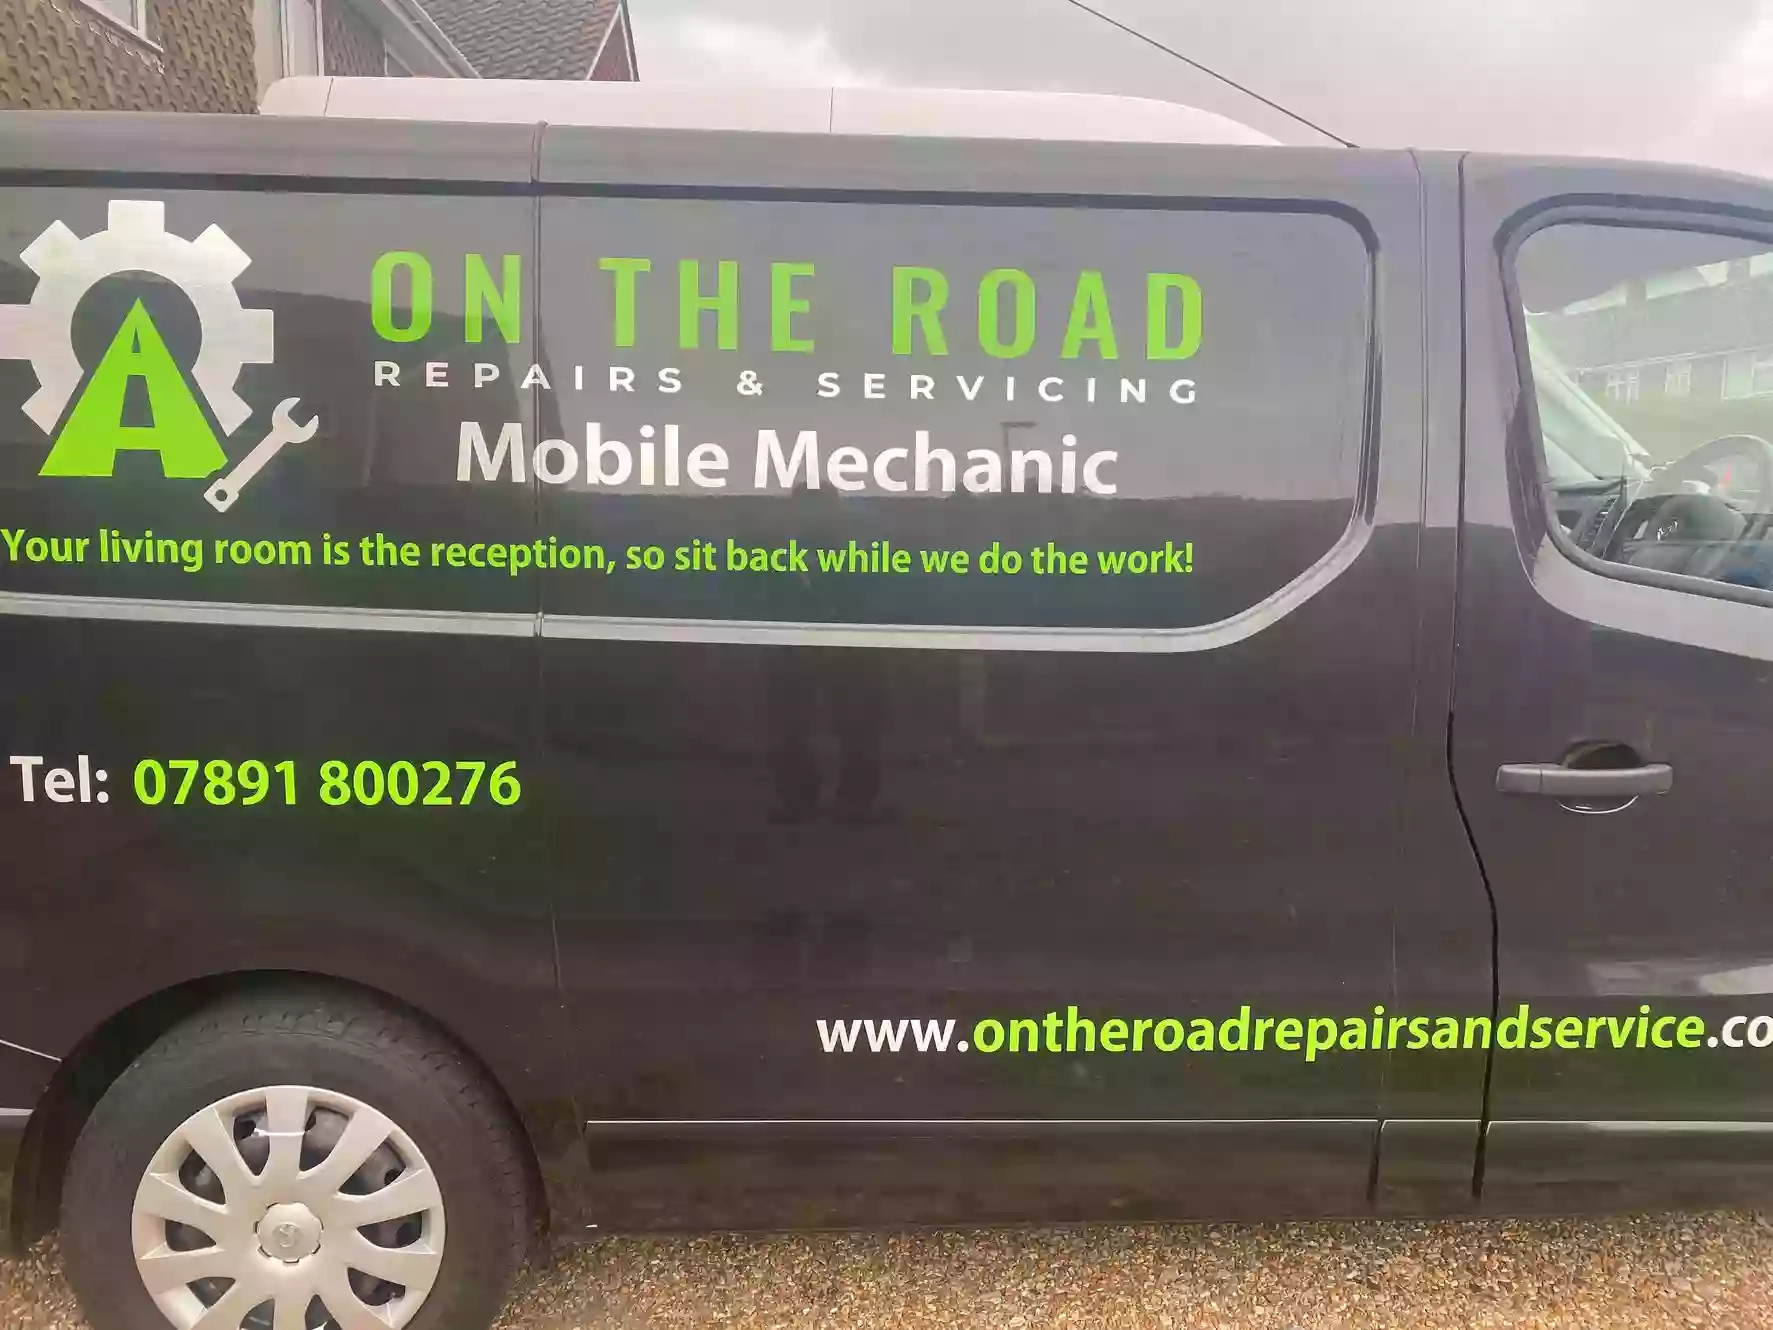 On the road repairs and servicing